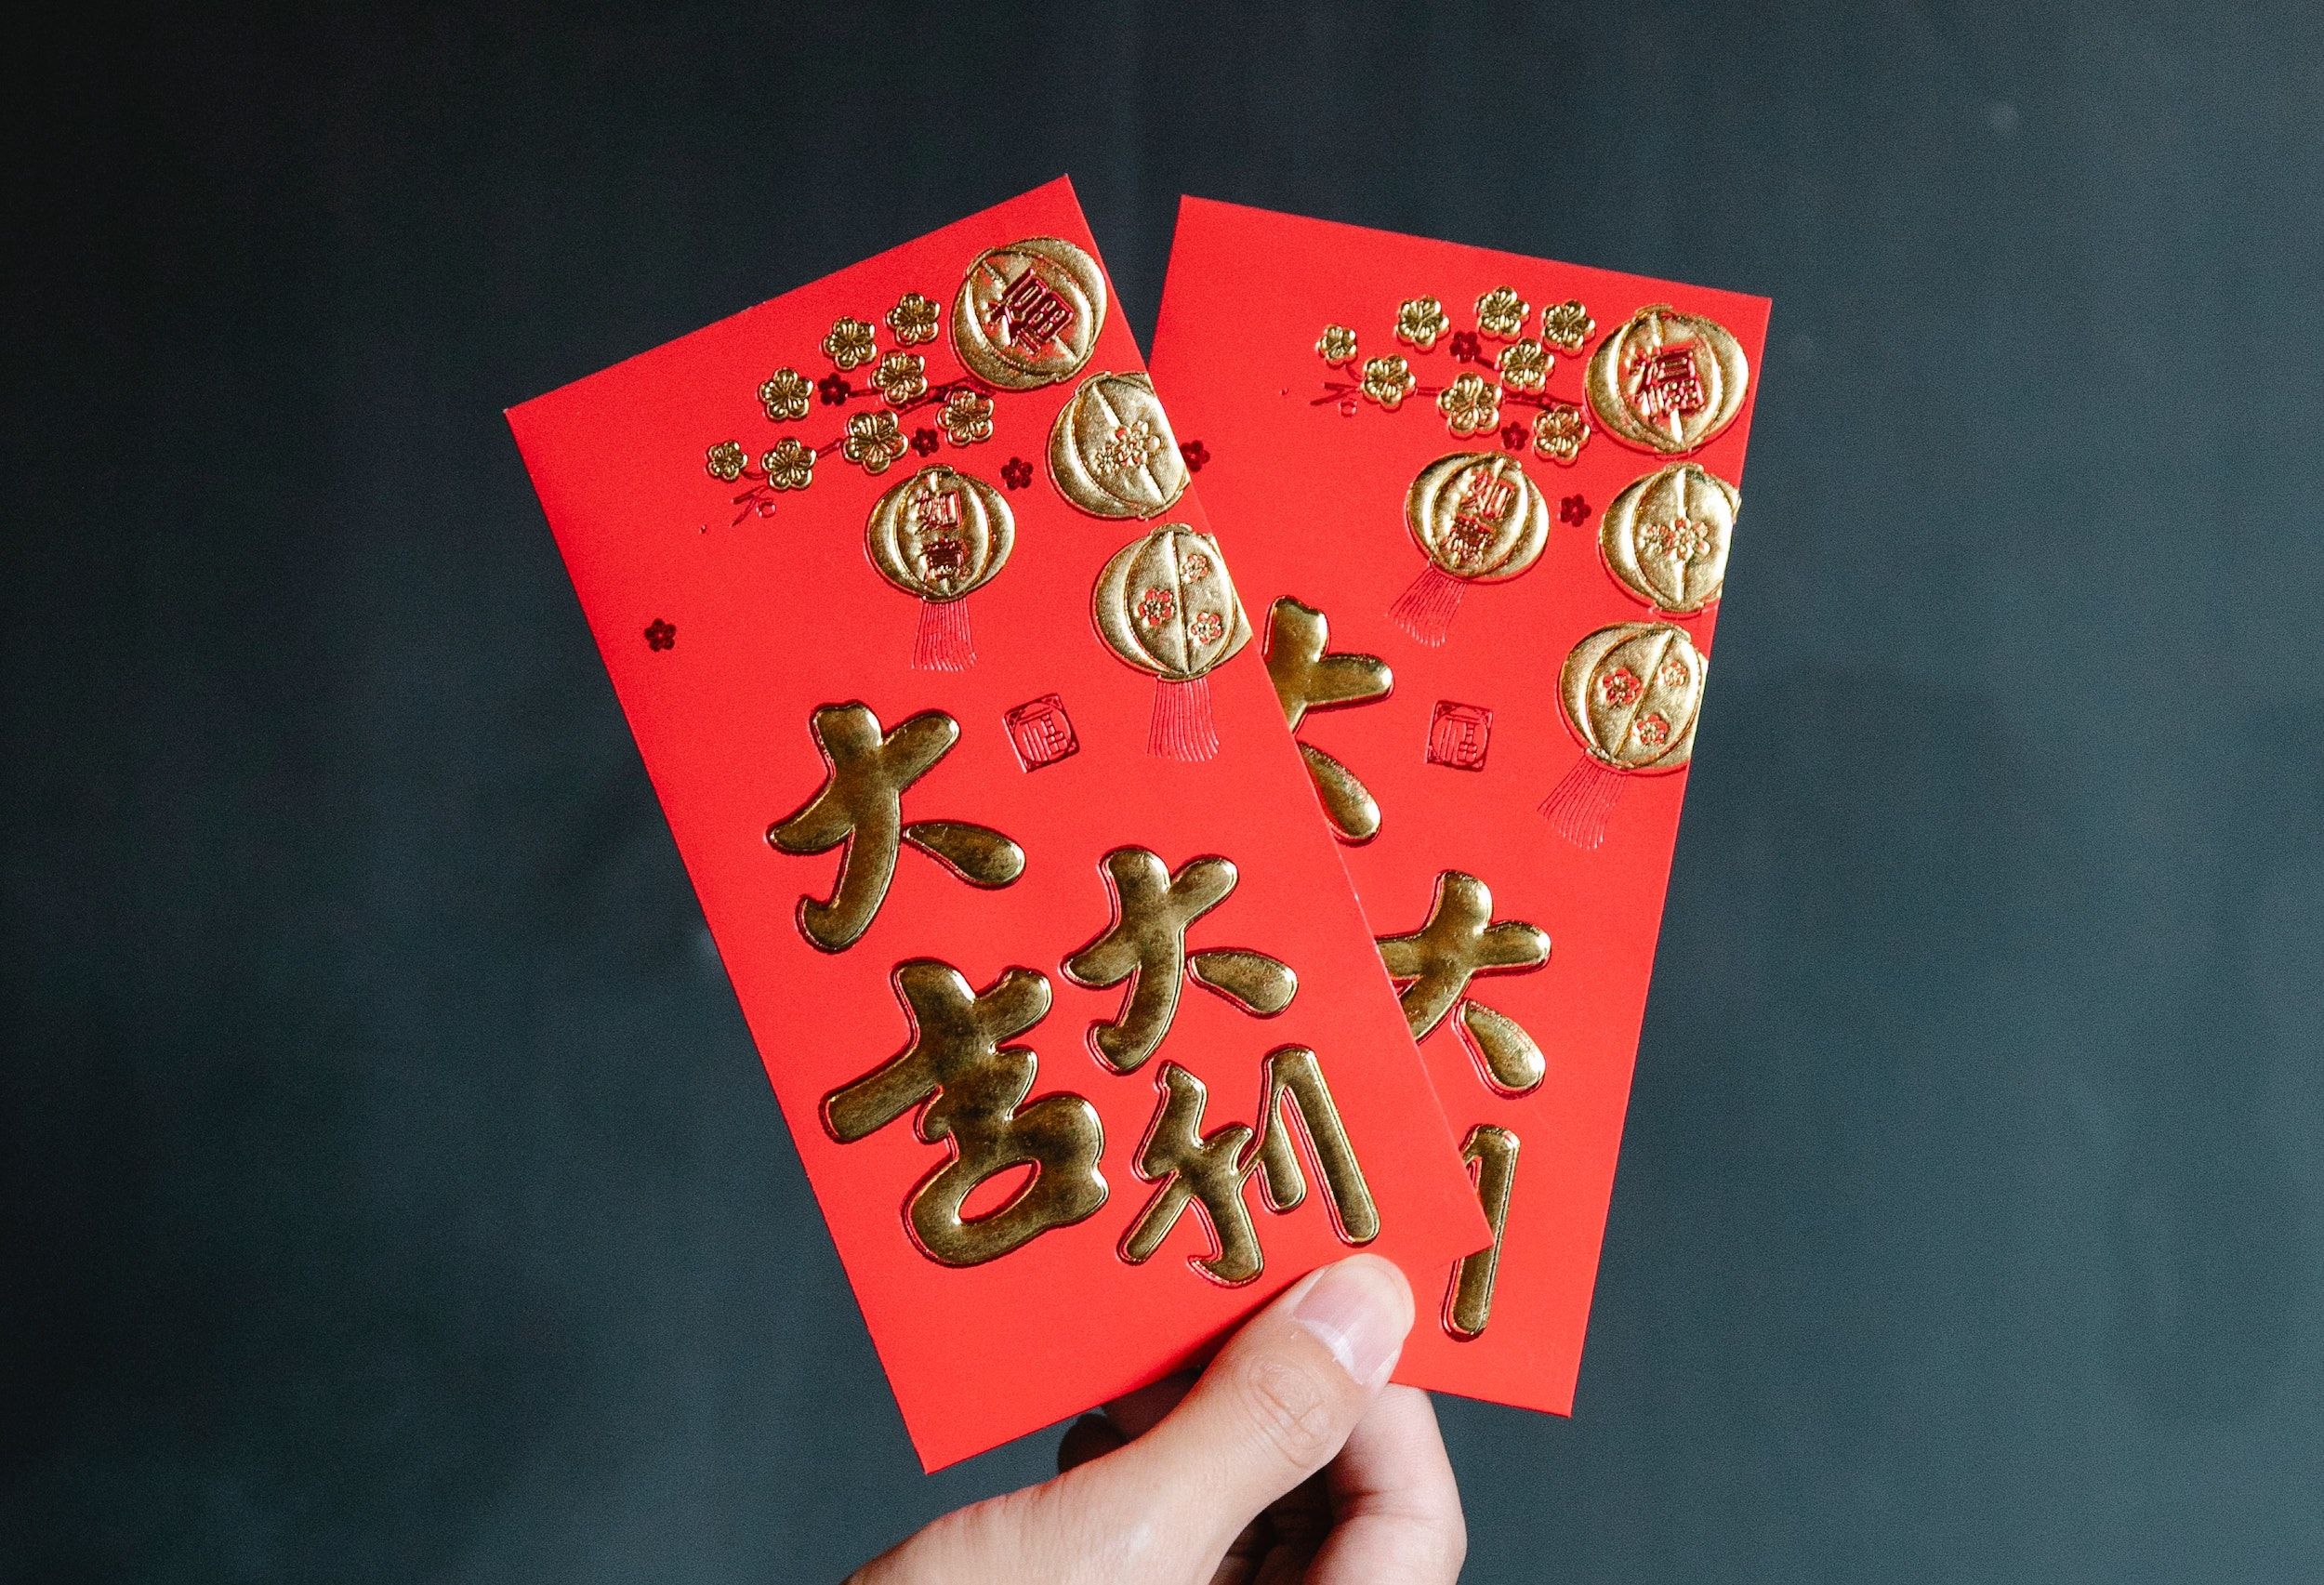 Your Guide To Red Envelope (Lai See) Etiquette - The HK HUB